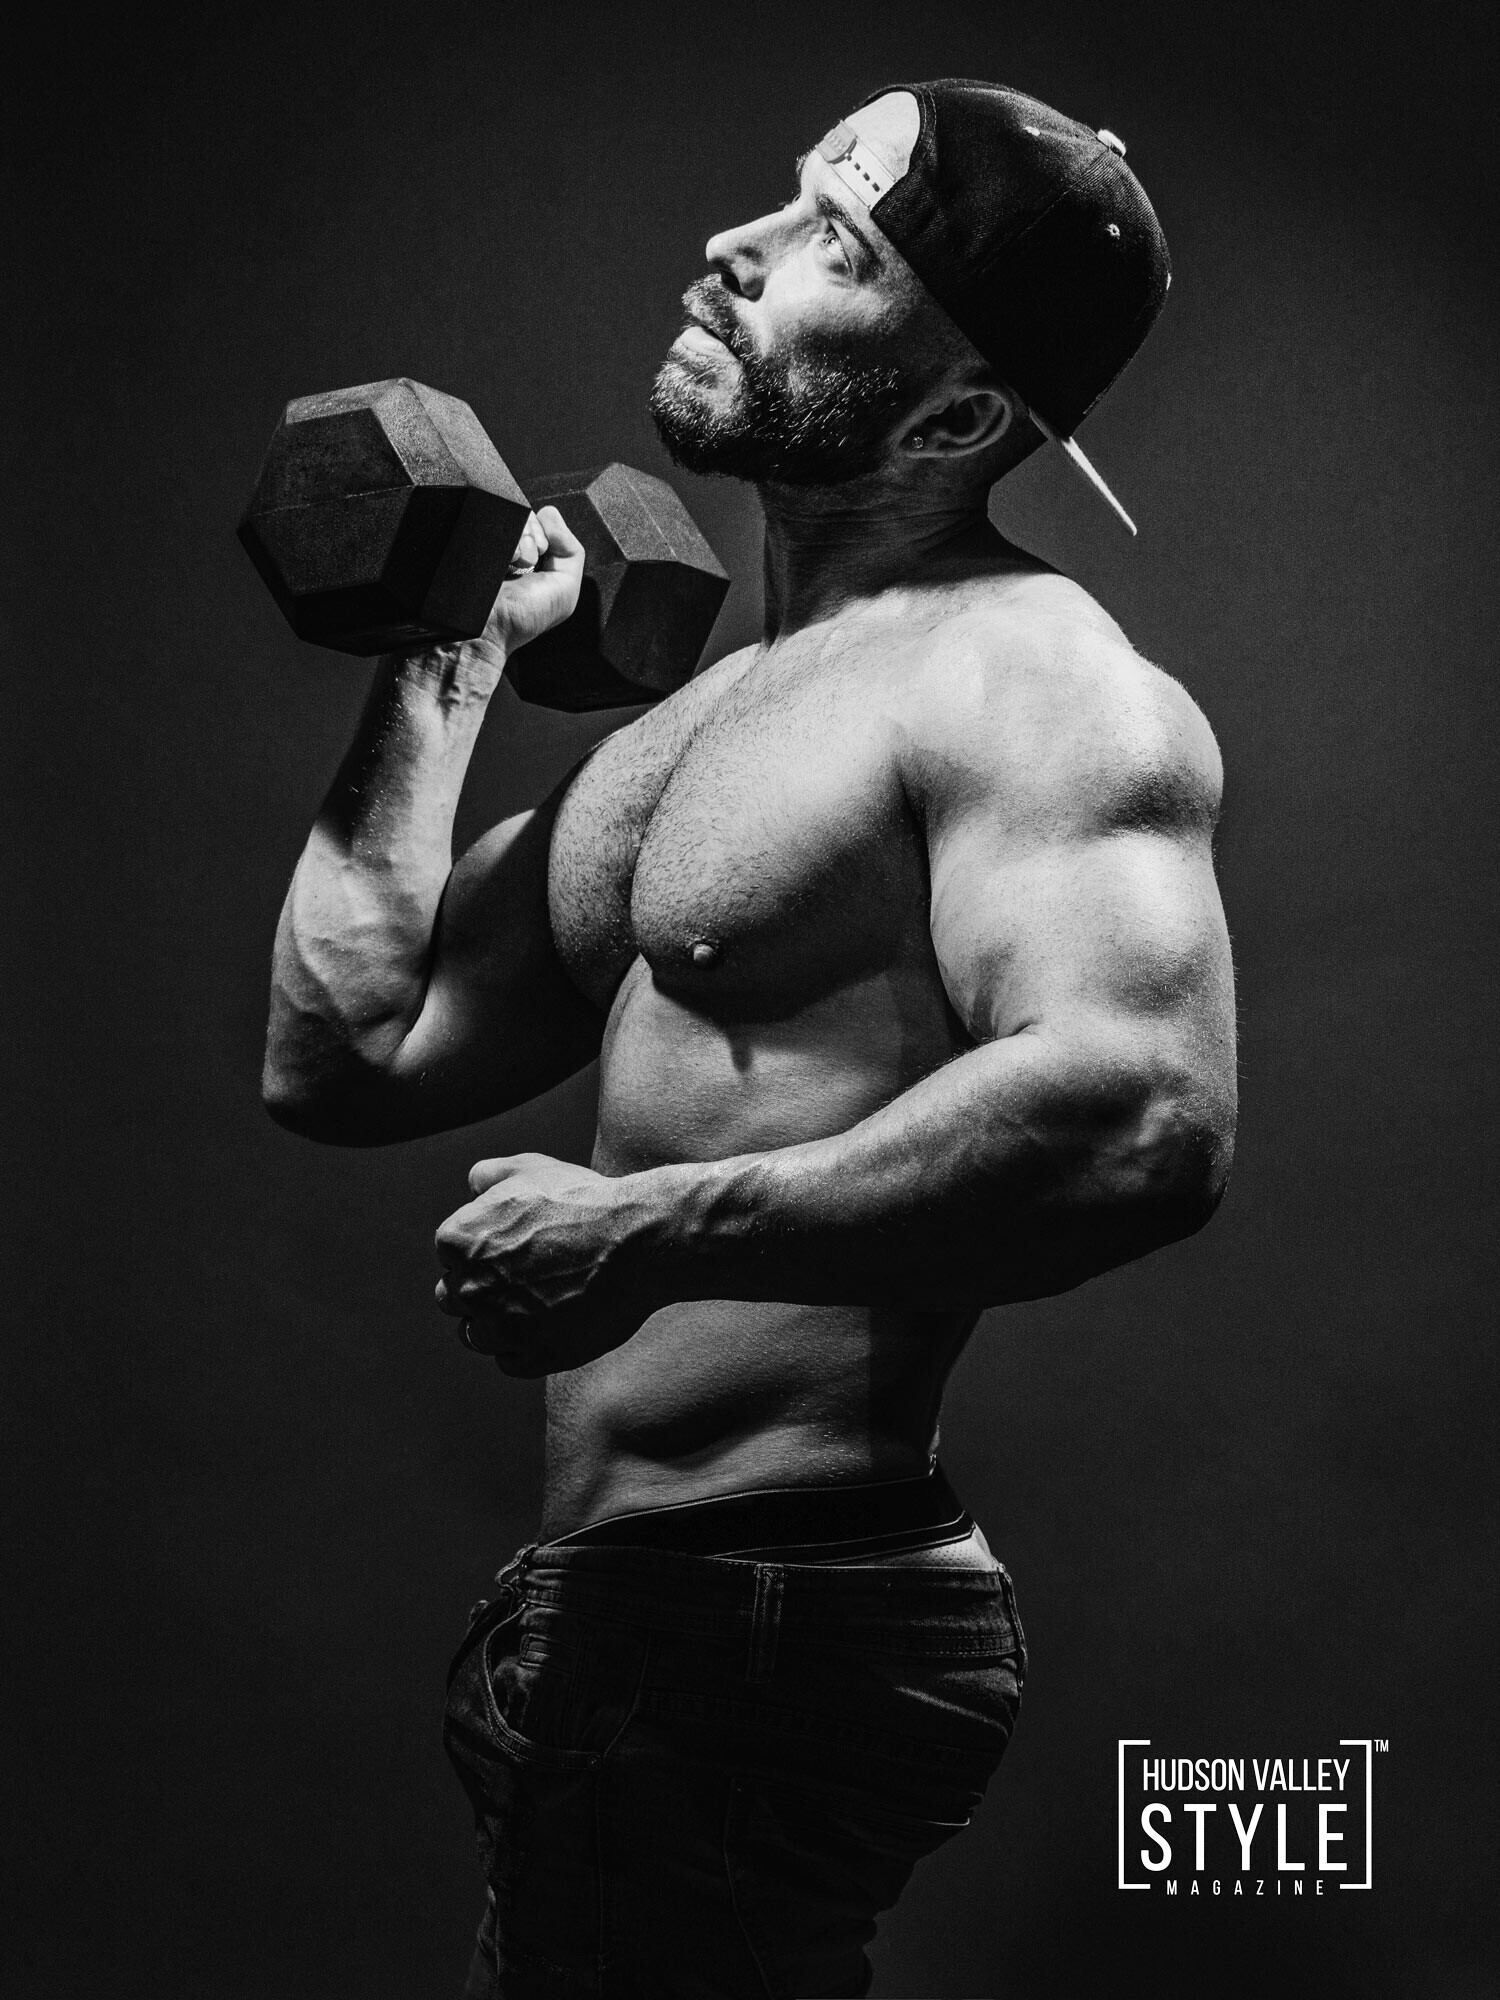 Bodybuilding photography tips from professional fitness photographer Maxwell Alexander